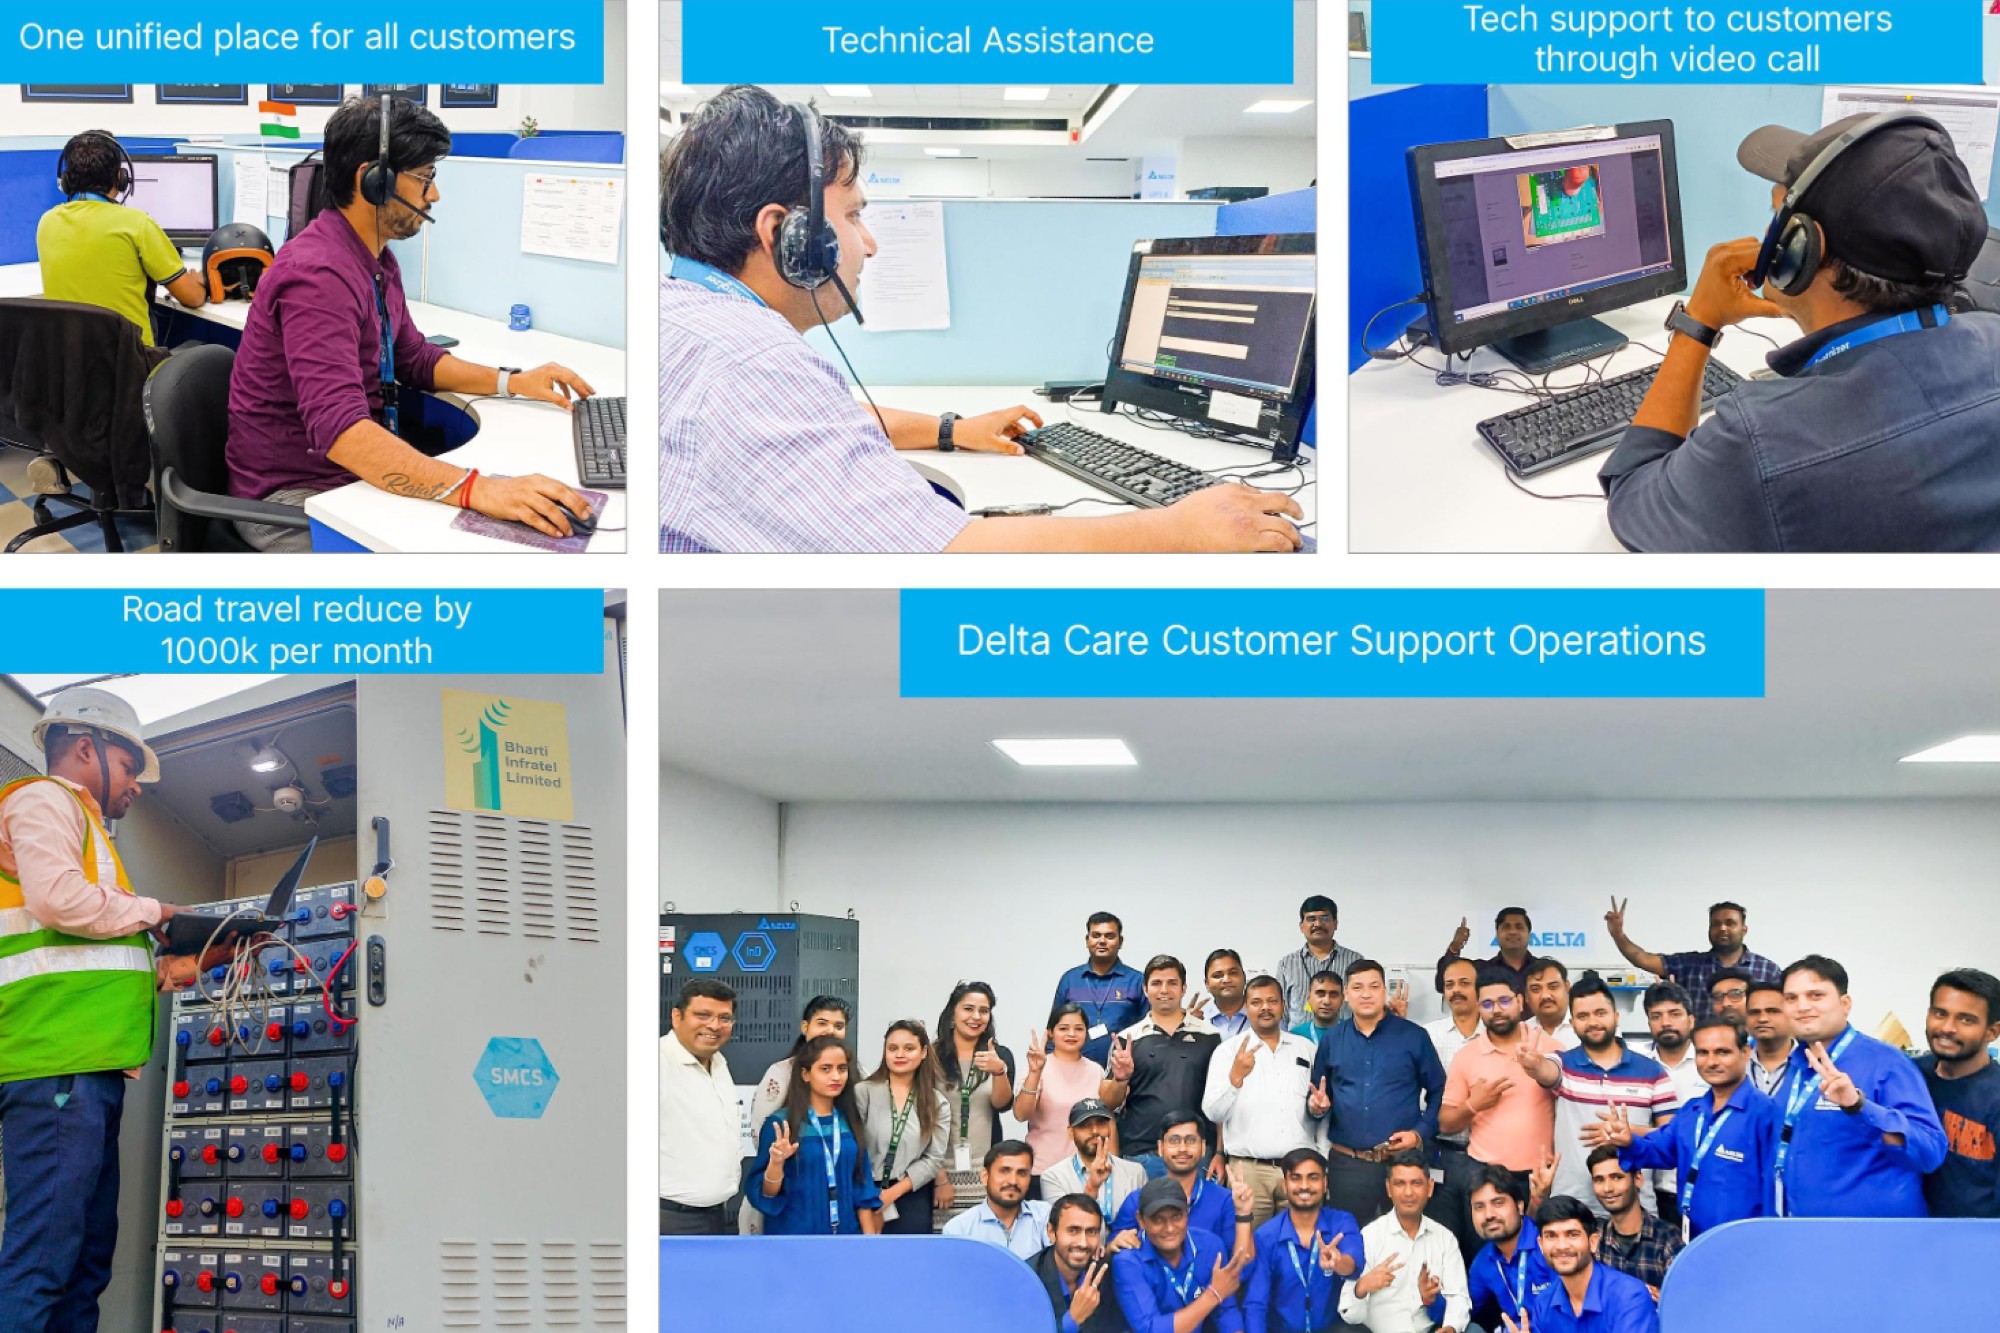 Delta Electronics uses emerging technology to improve the telecom services it delivers